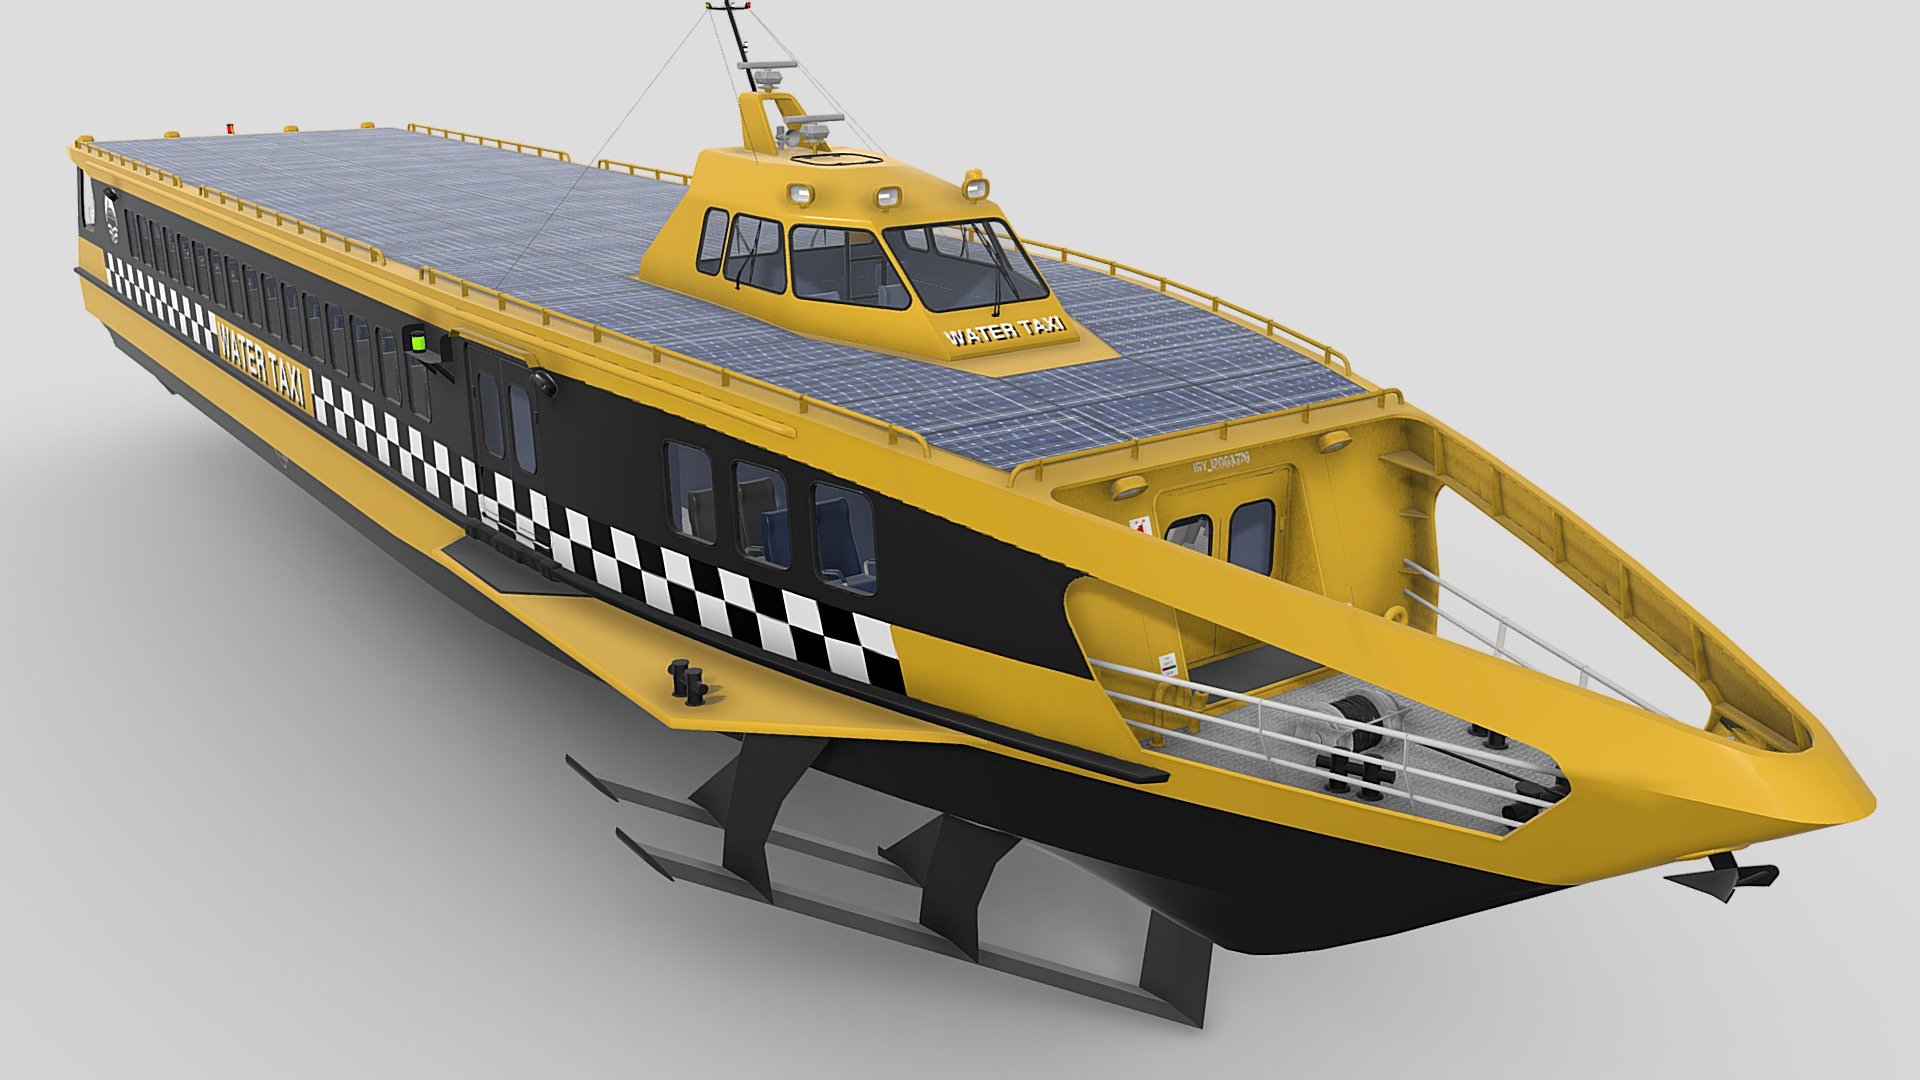 Highly detailed Fast Passenger Monohull Ferry.
For distant and close angles.
For visualization of animations and games.
The Model has an original size.
- Model formats: * .max . ma .fbx .obj .blend
Fast Passenger Monohull Ferry
Principal Dimension
LOA 36.20 Meter
Beam 7.50 Meter
Draft 1.20 Meter
Speed 32 Knots
Passenger capacity 194 Perso - Fast Passanger ferry Yellow - Buy Royalty Free 3D model by IgYerm (@IgorYerm) 3d model